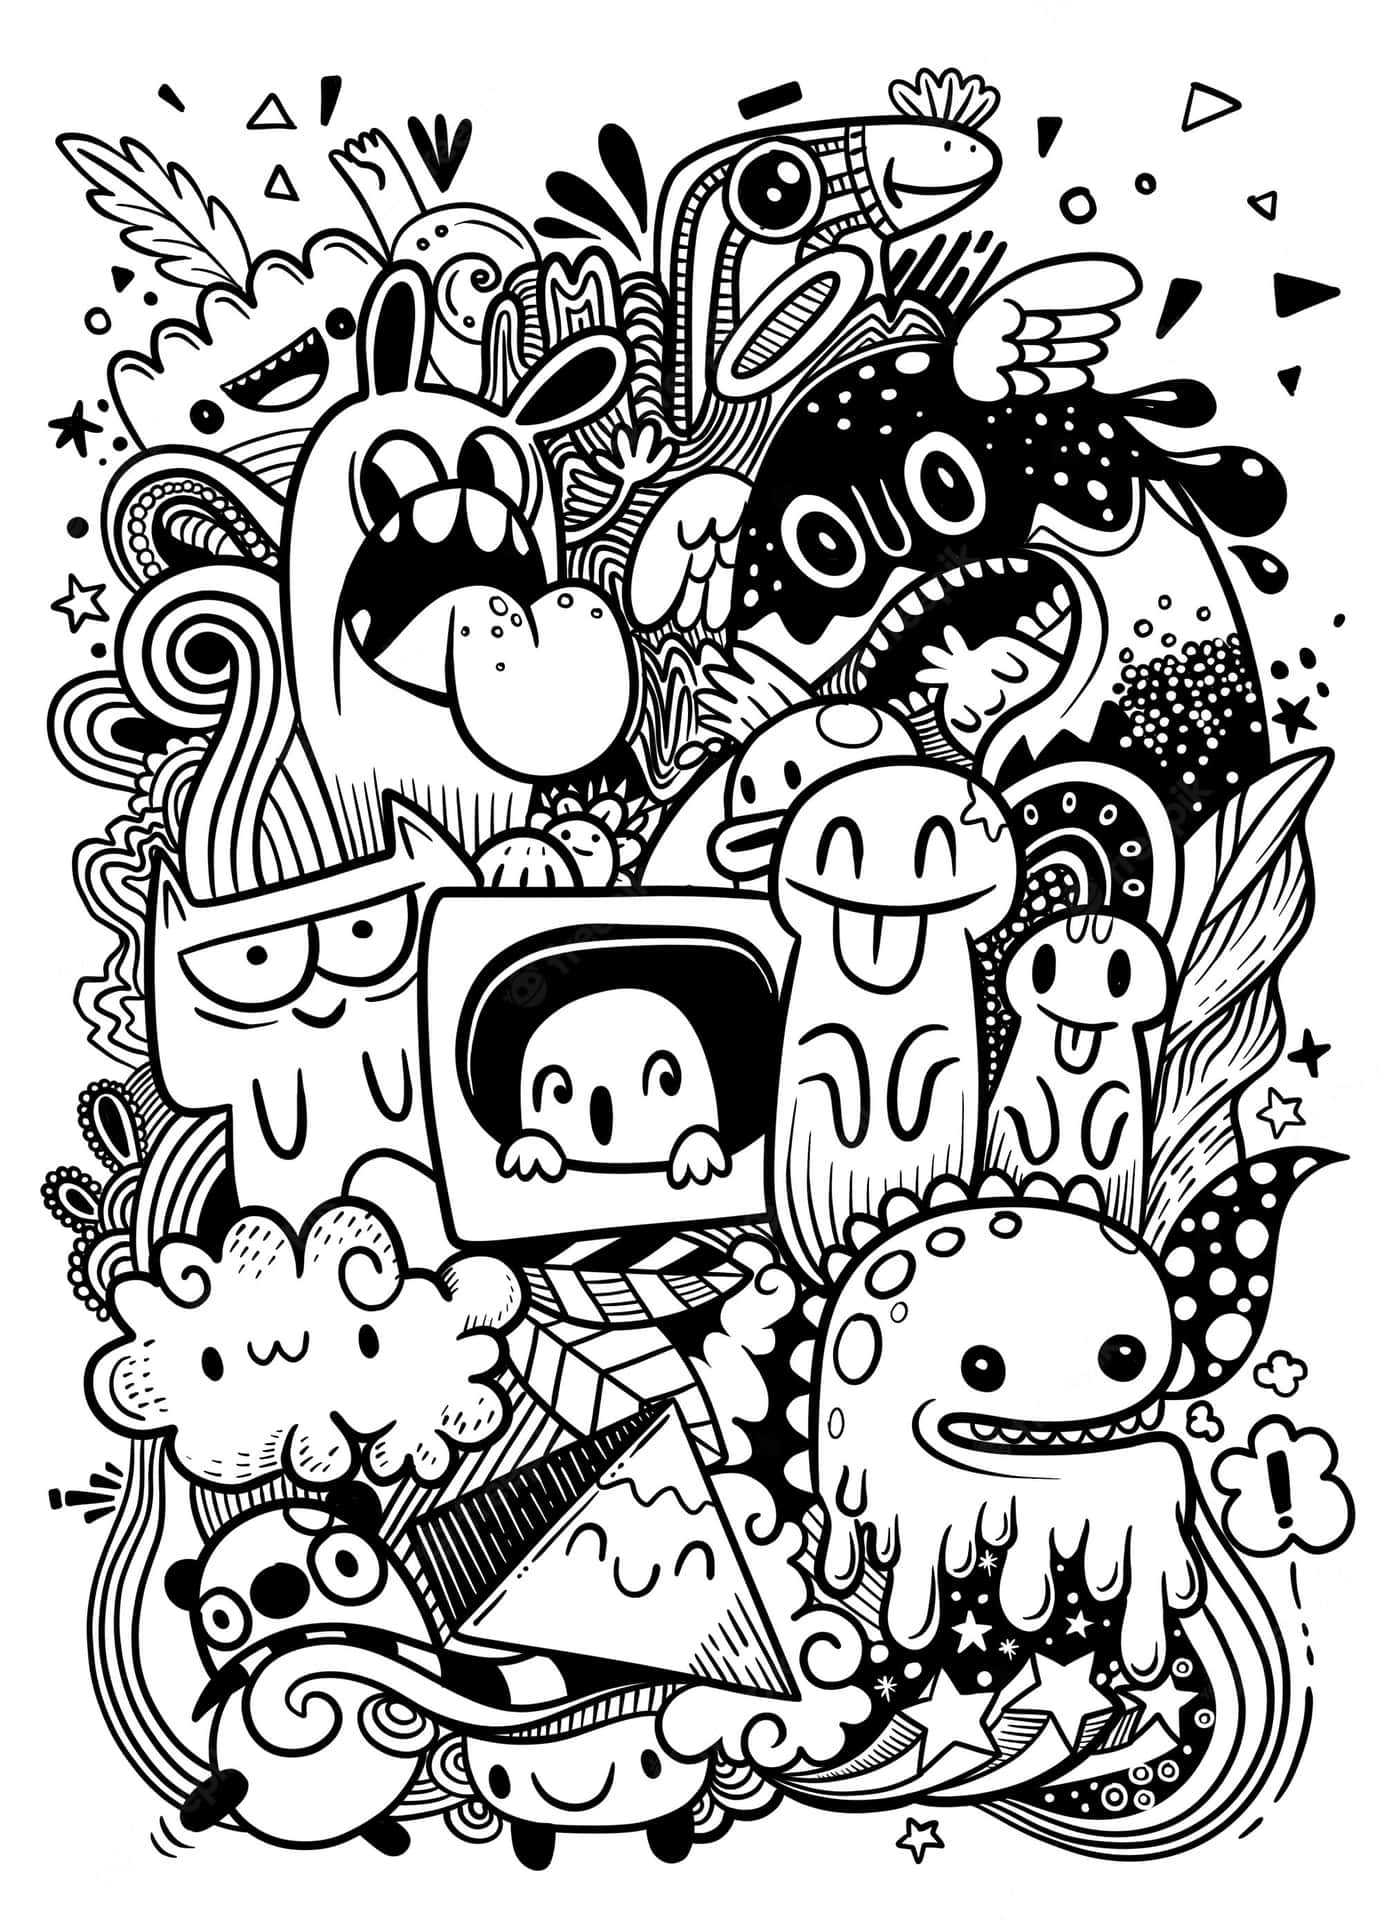 Intricate black and white drawing depicting multiple objects and patterns Wallpaper